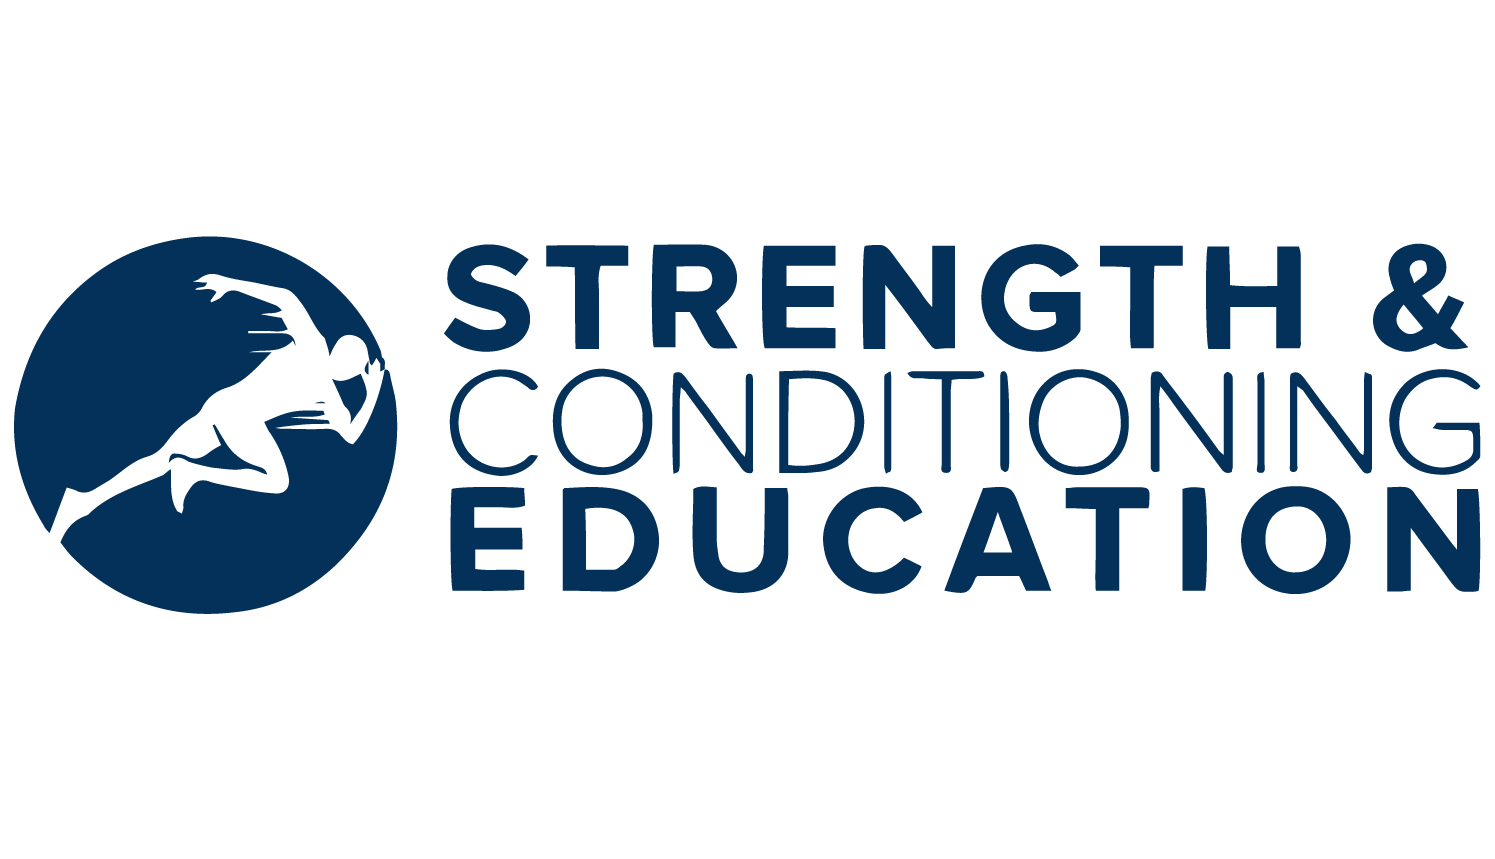 What is Strength & Conditioning? - Strength and Conditioning Education